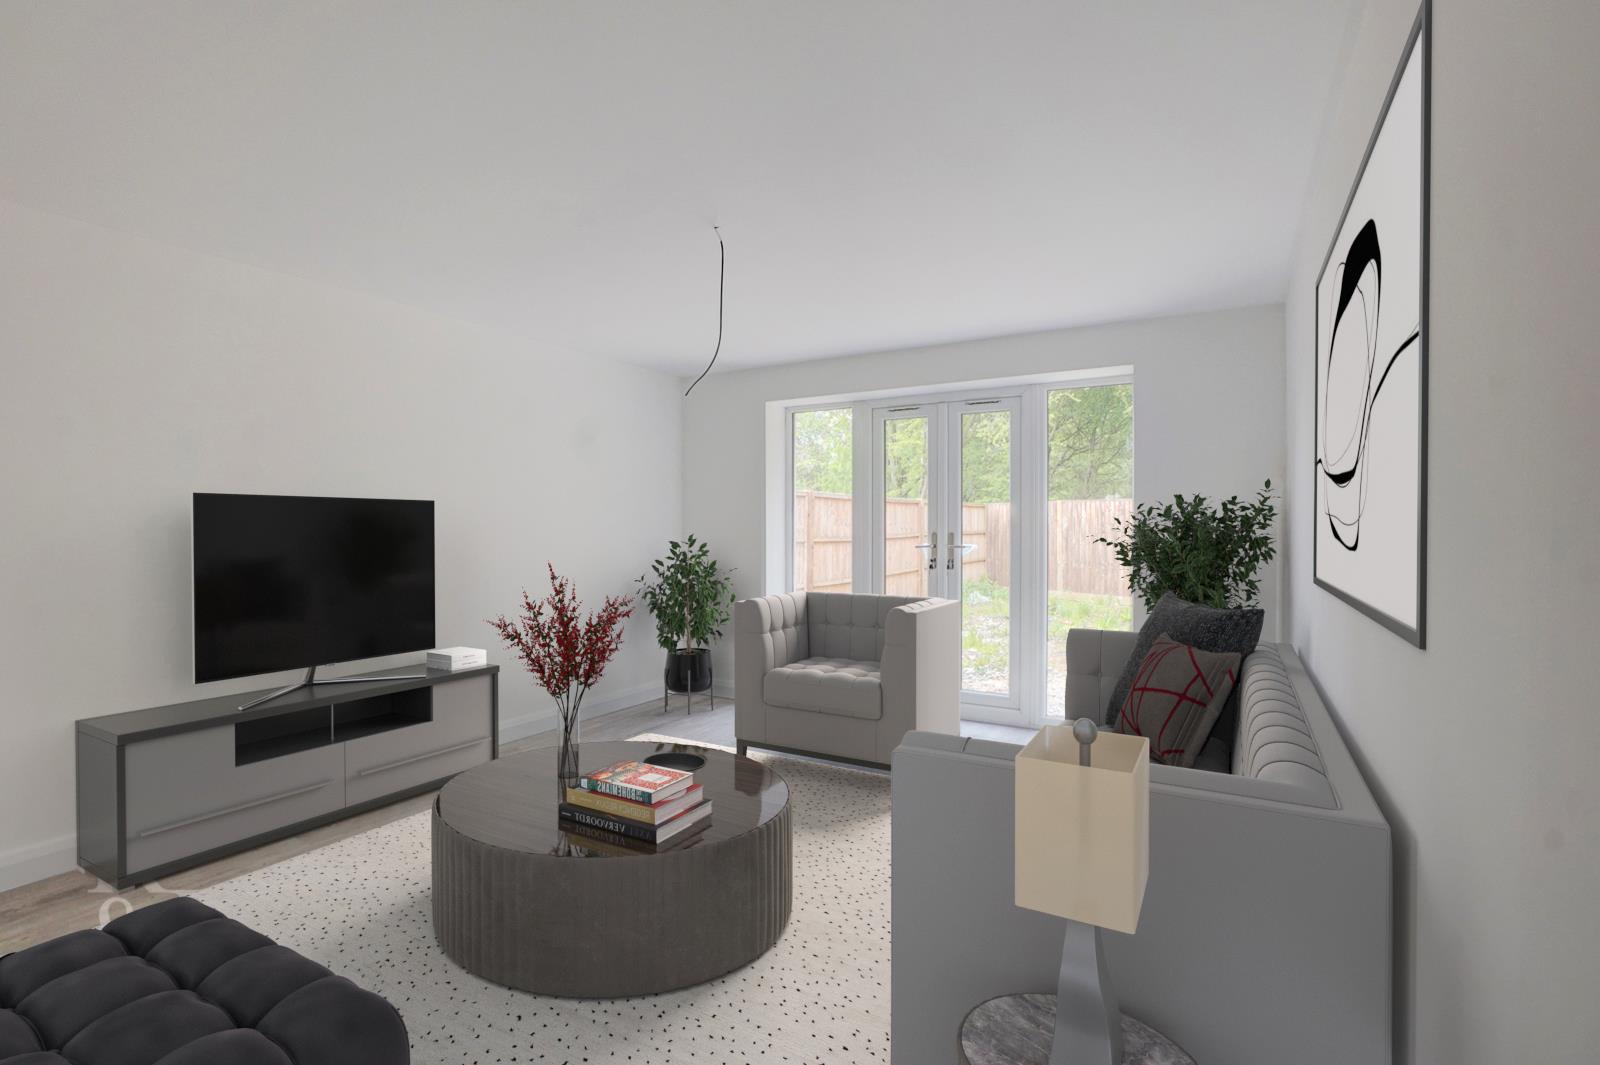 Property image for Willow Woods Close, Newbold Coleorton